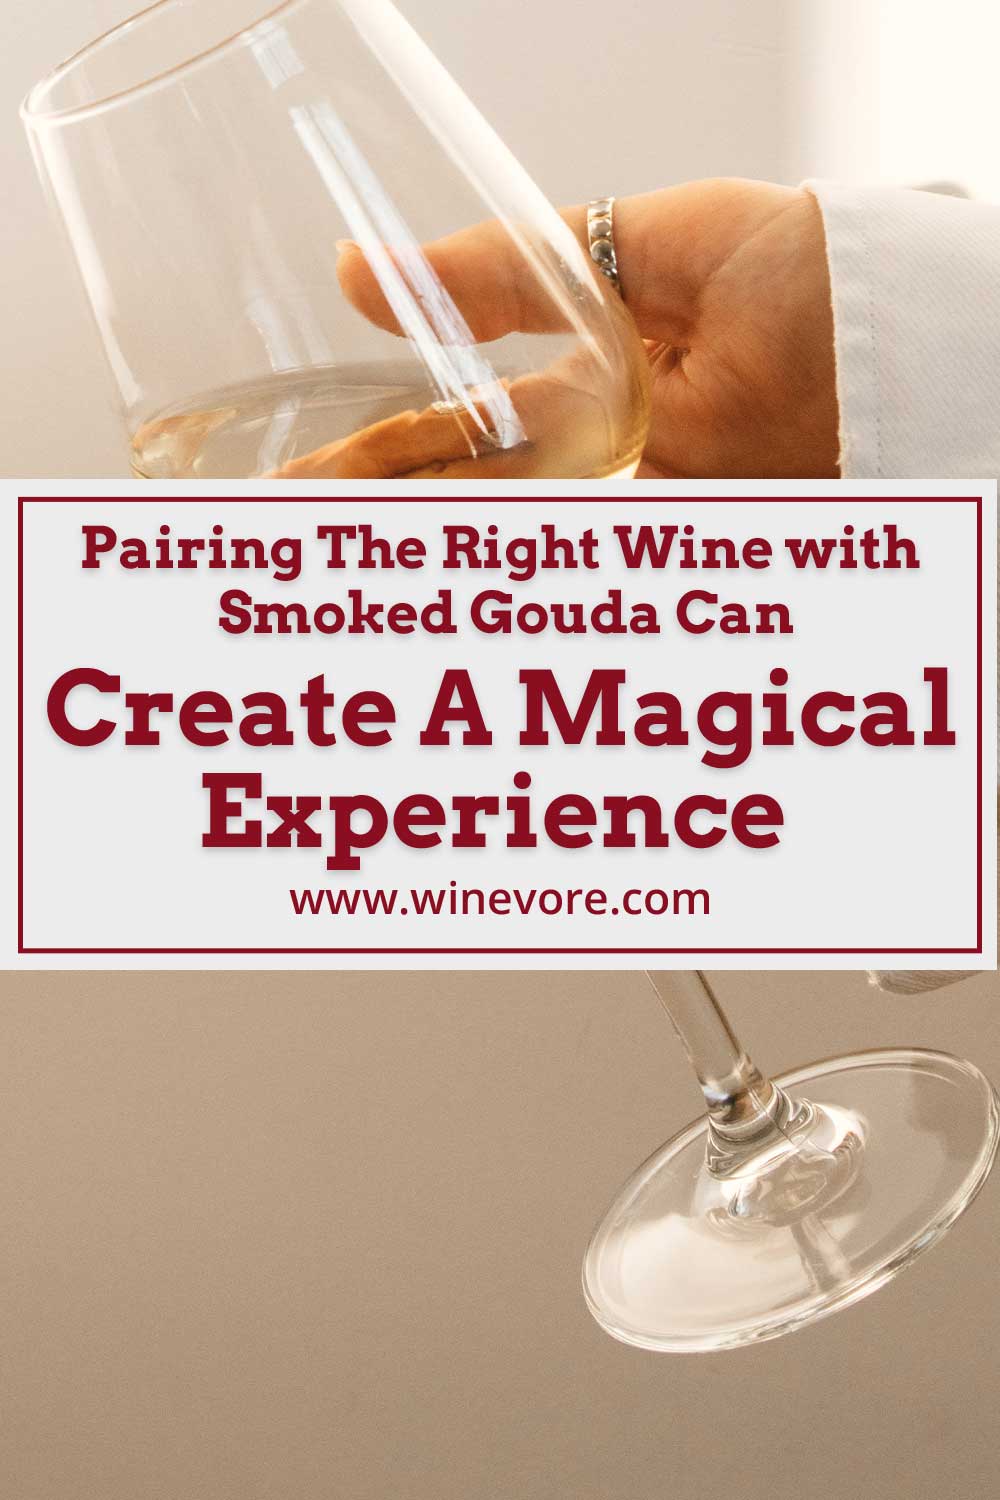 A wine glass held by a woman's hand - Pairing The Right Wine with Smoked Gouda.